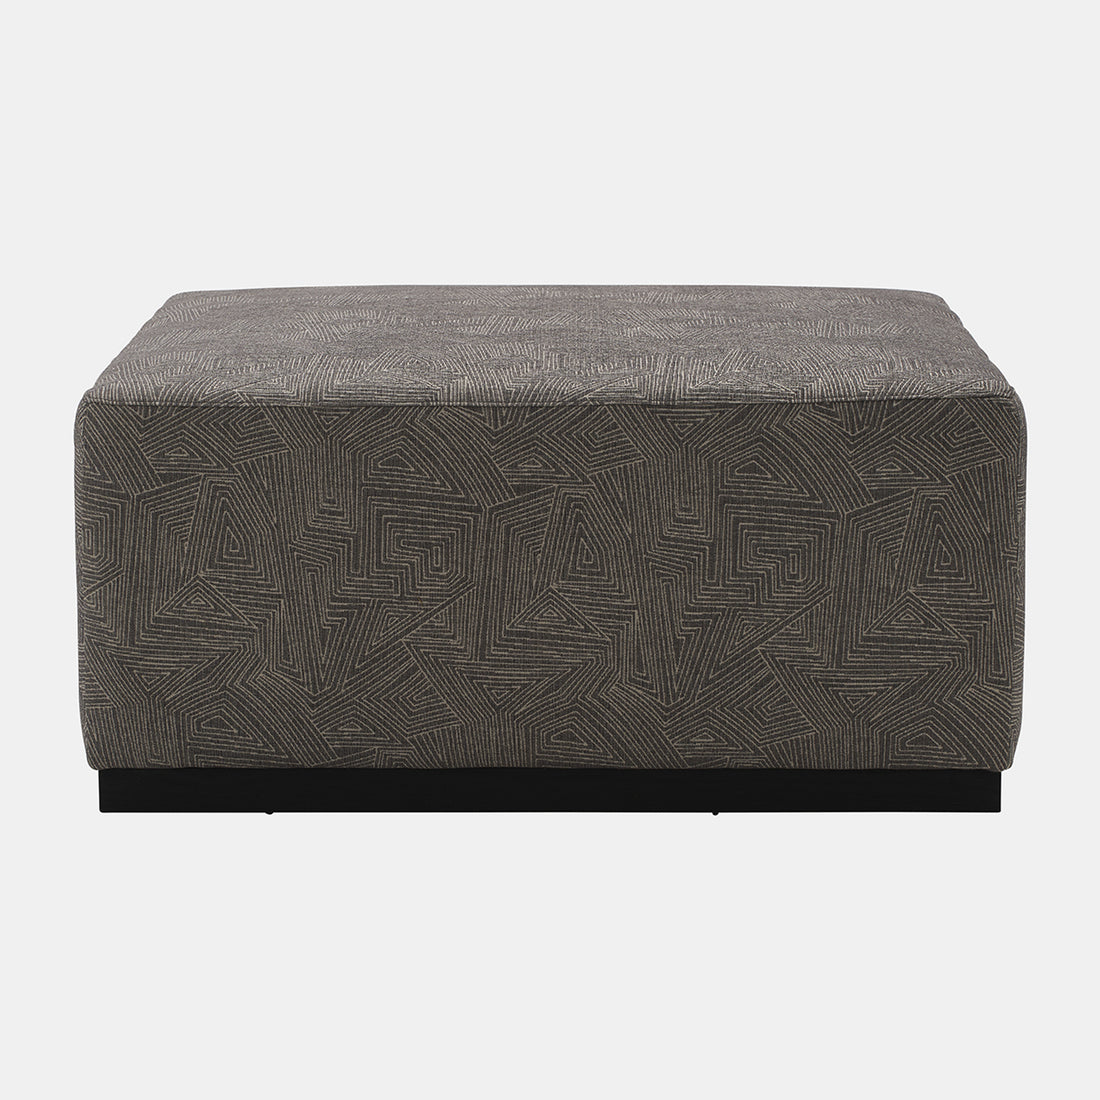 Sagebrook Home 40x18 Upholstered Square Ottoman, Gray